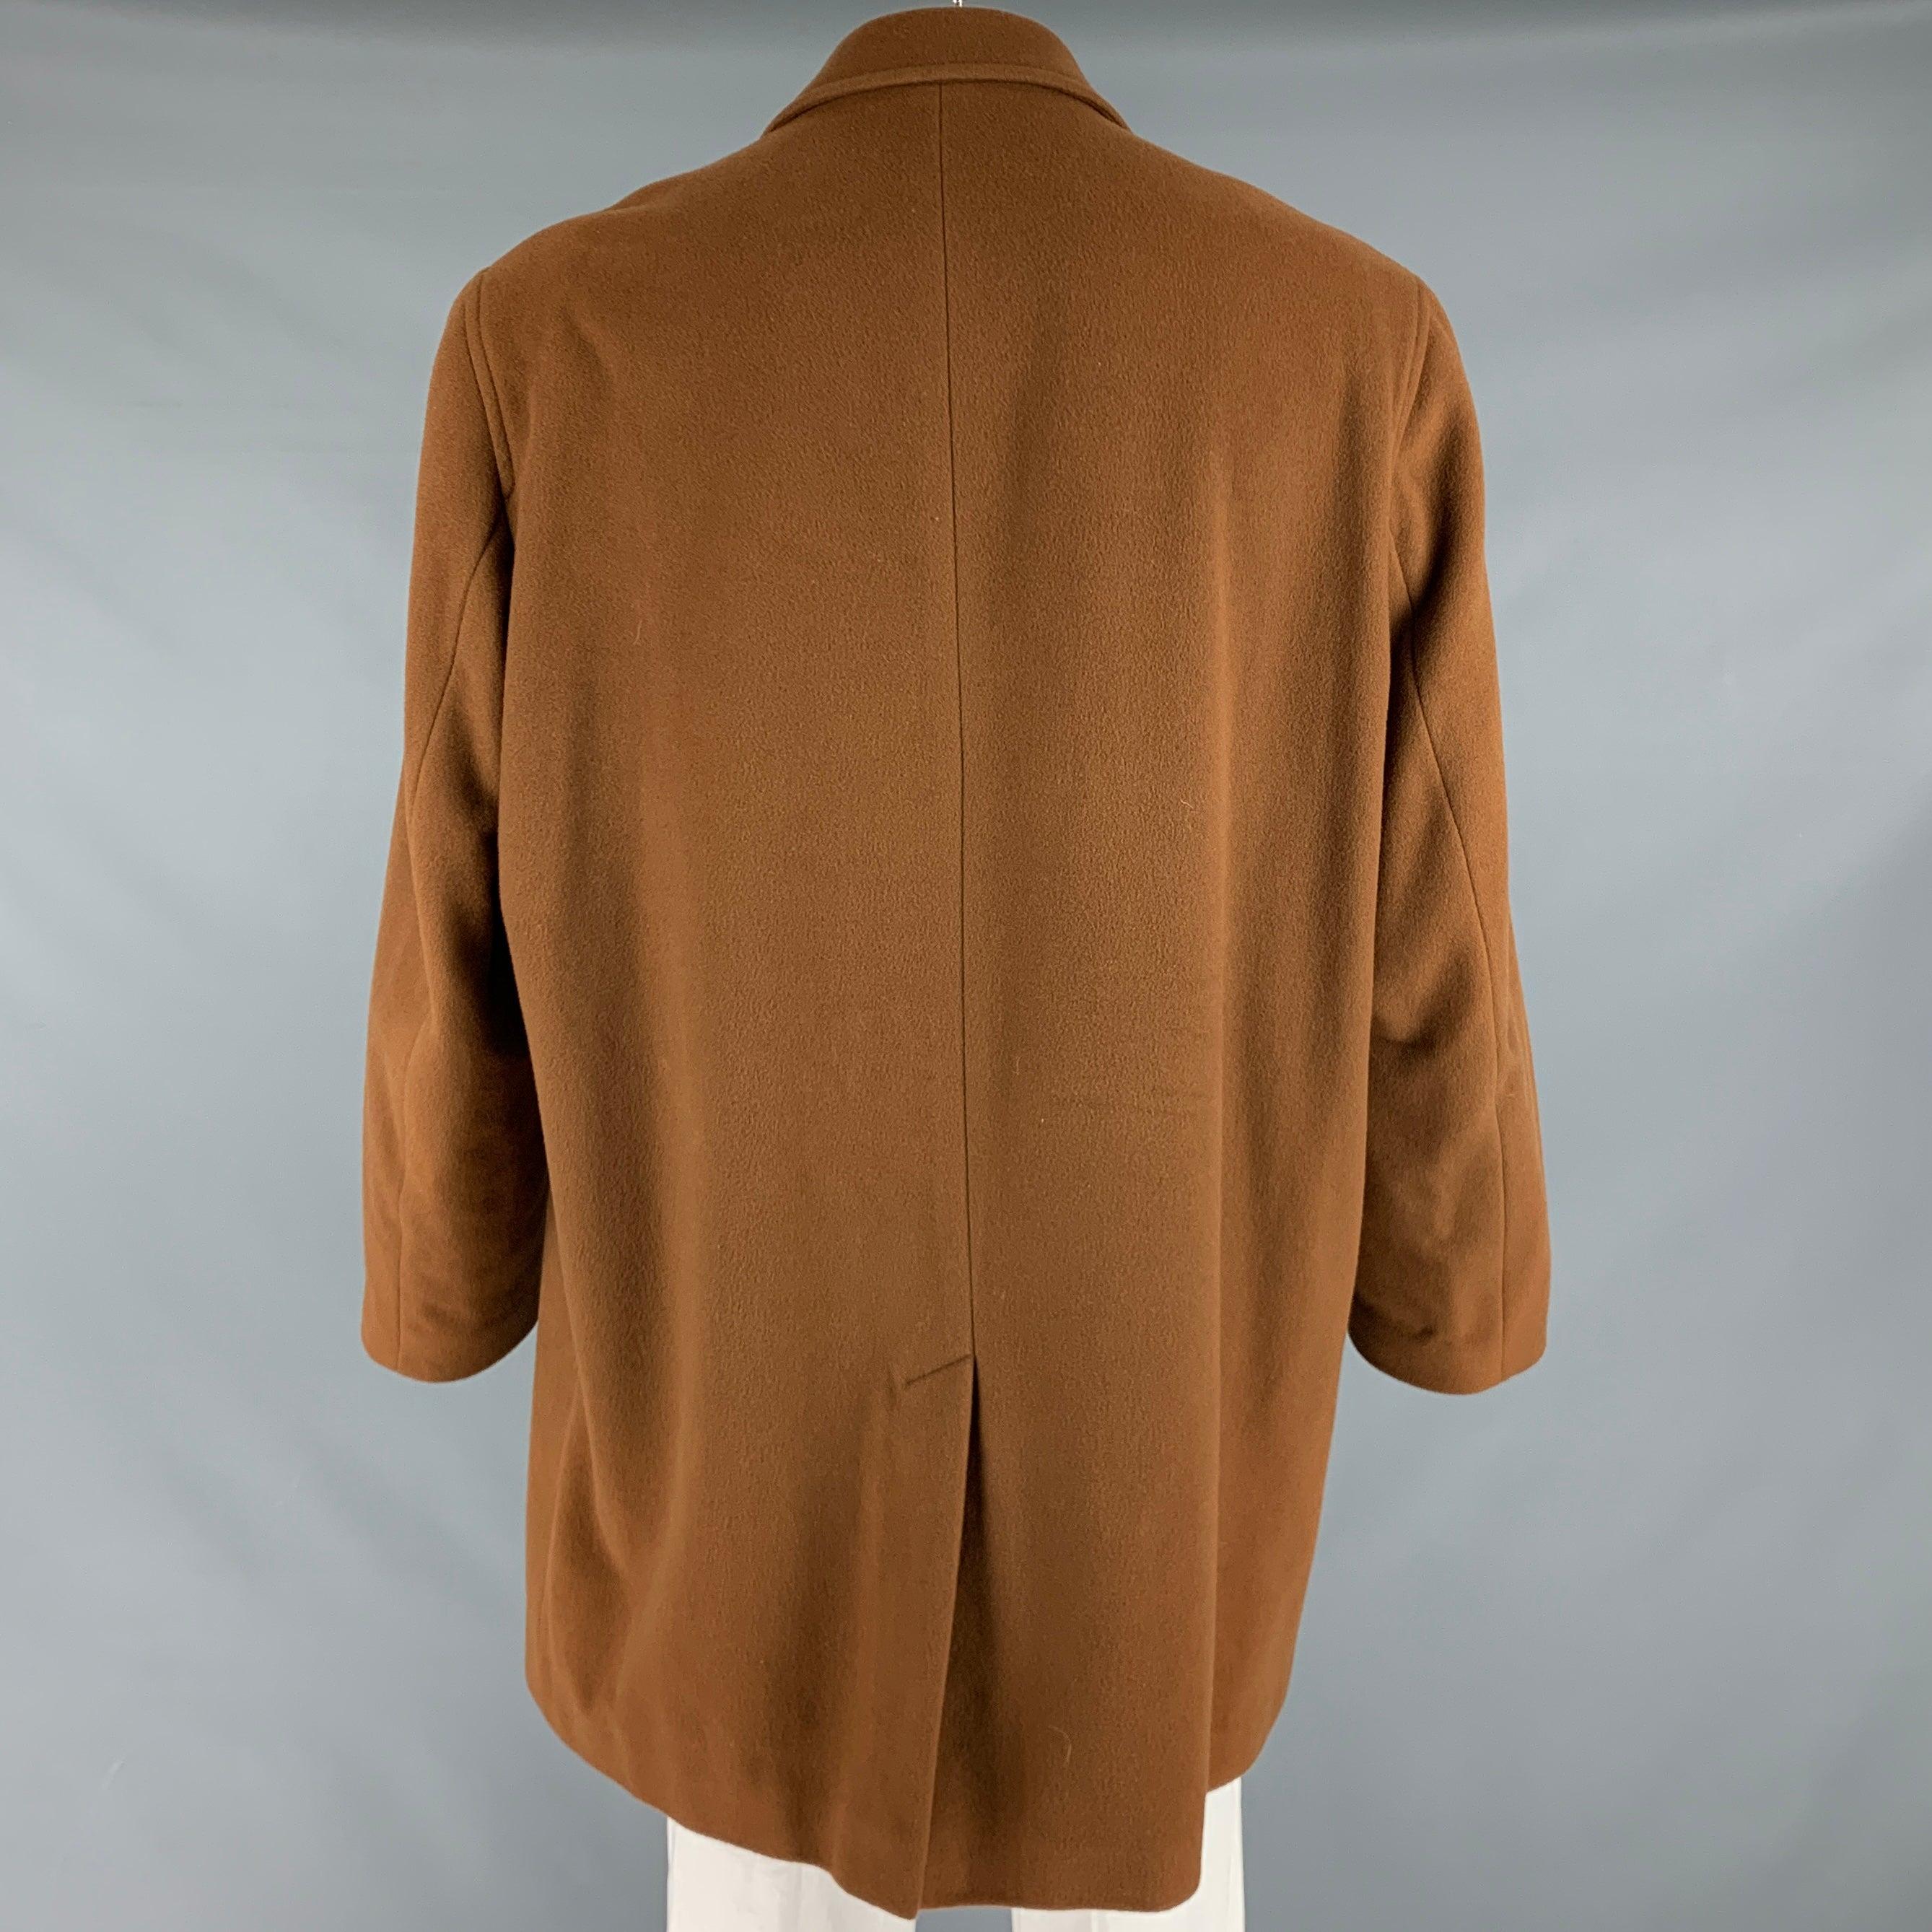 SAKS FIFTH AVENUE Size 48 Tan Wool Cashmere Coat In Good Condition For Sale In San Francisco, CA